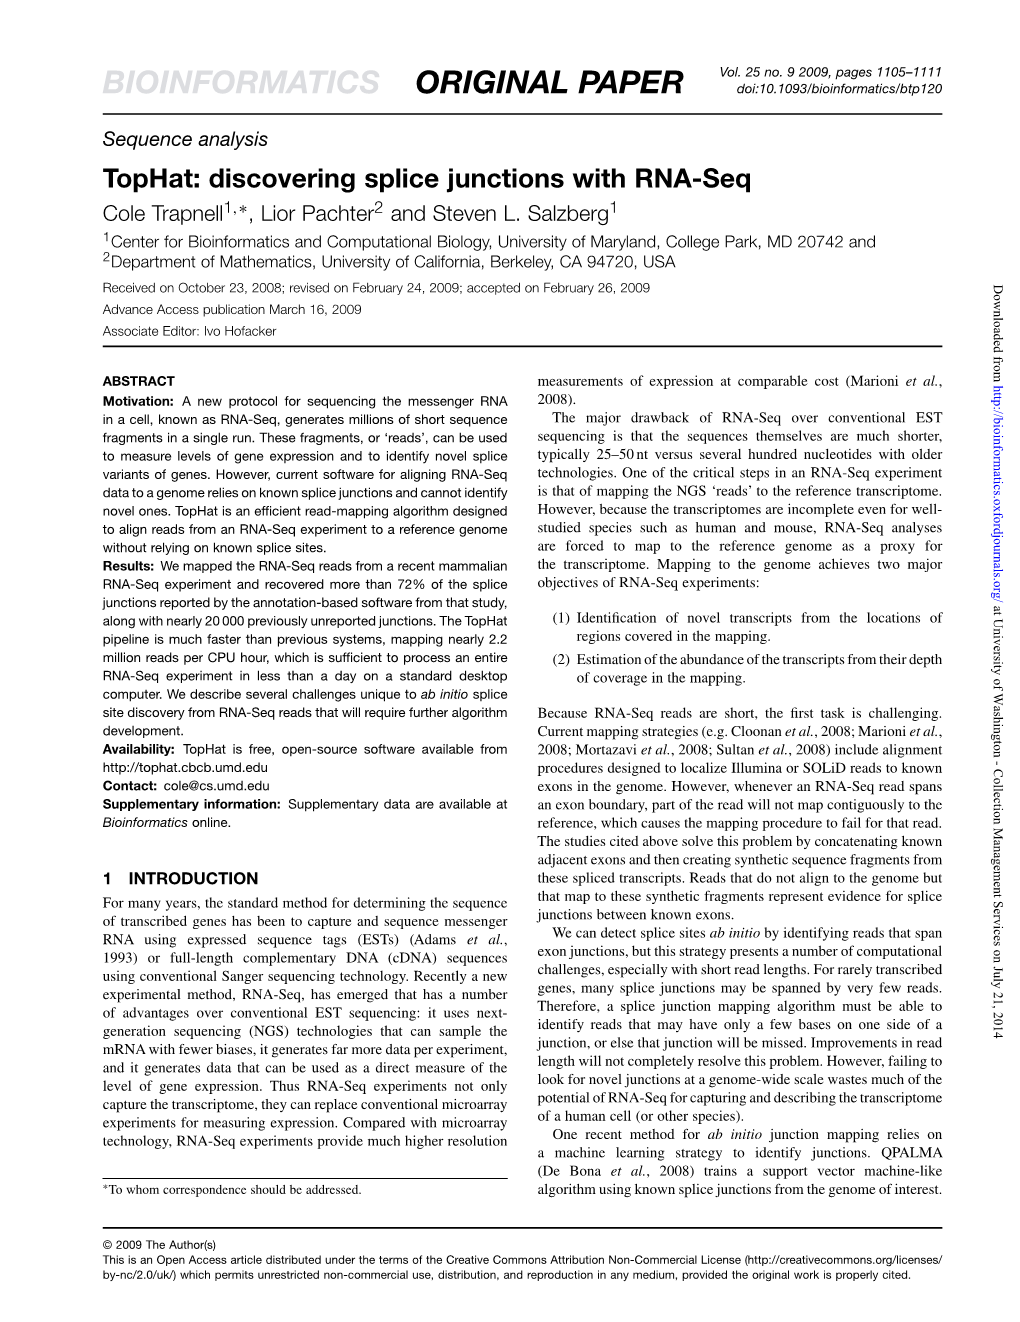 Tophat: Discovering Splice Junctions with RNA-Seq Cole Trapnell1,∗, Lior Pachter2 and Steven L